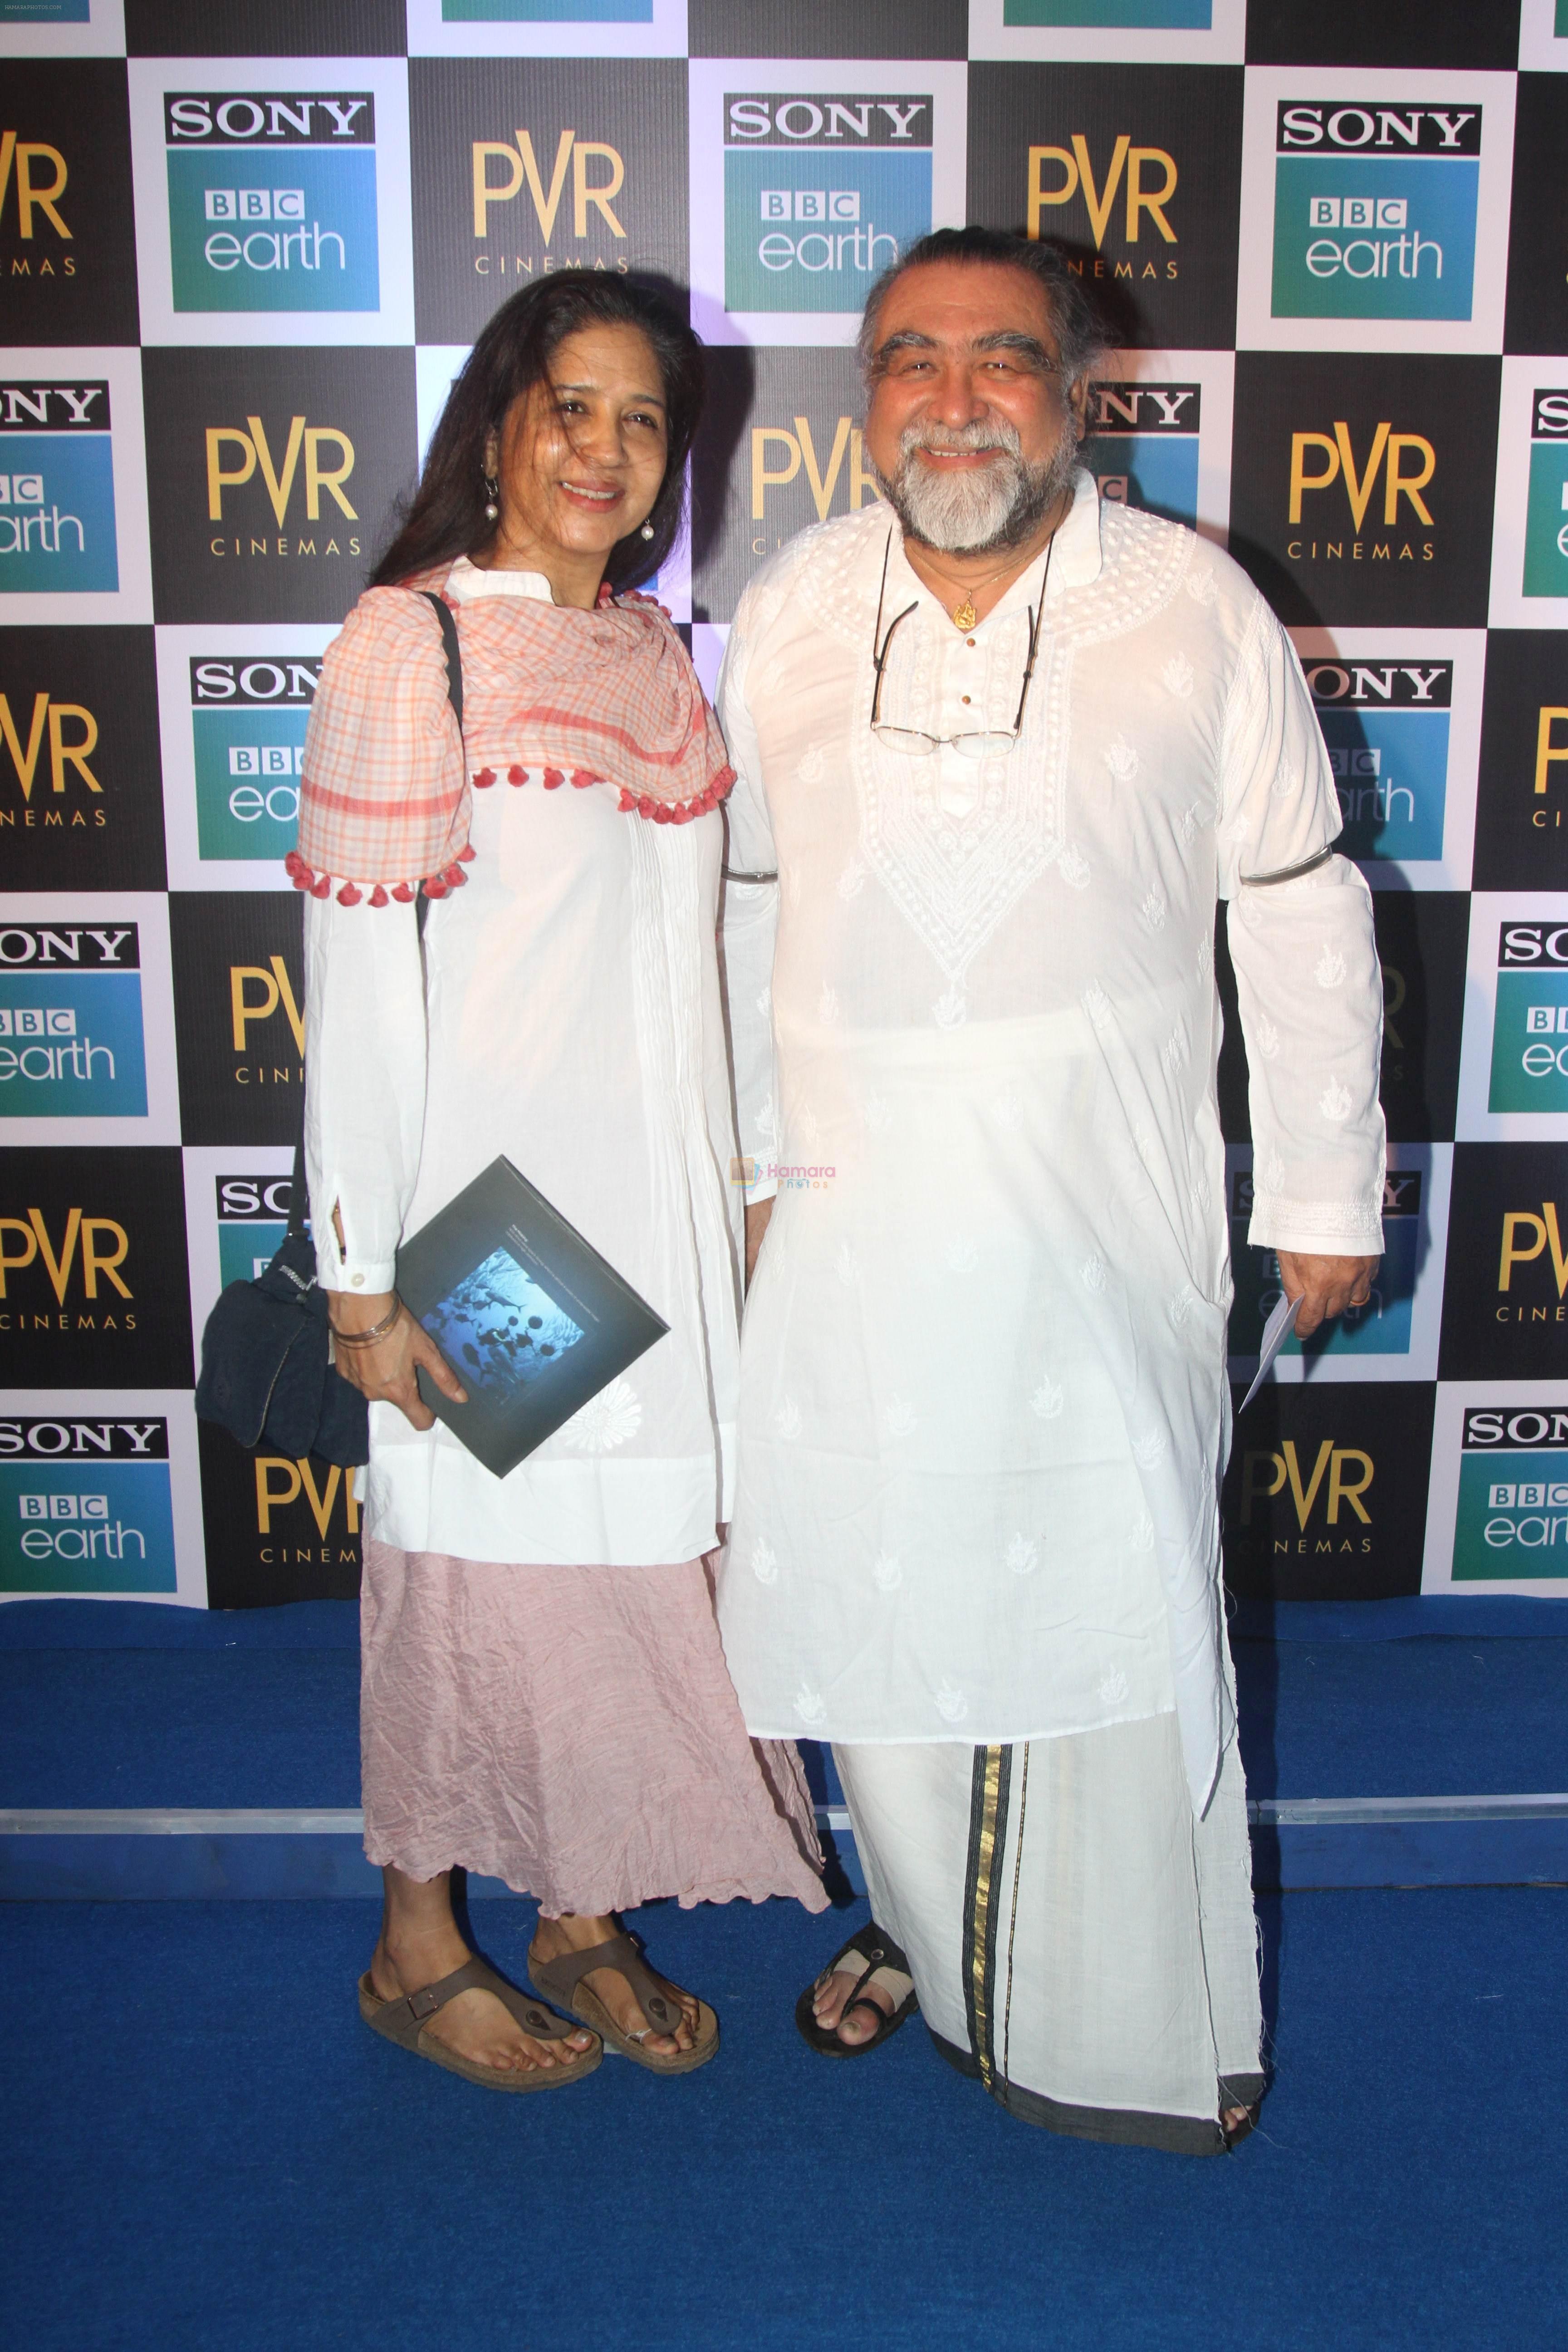 at the Screening of Sony BBC Earth's film Blue Planet 2 at pvr icon in andheri on 15th May 2018